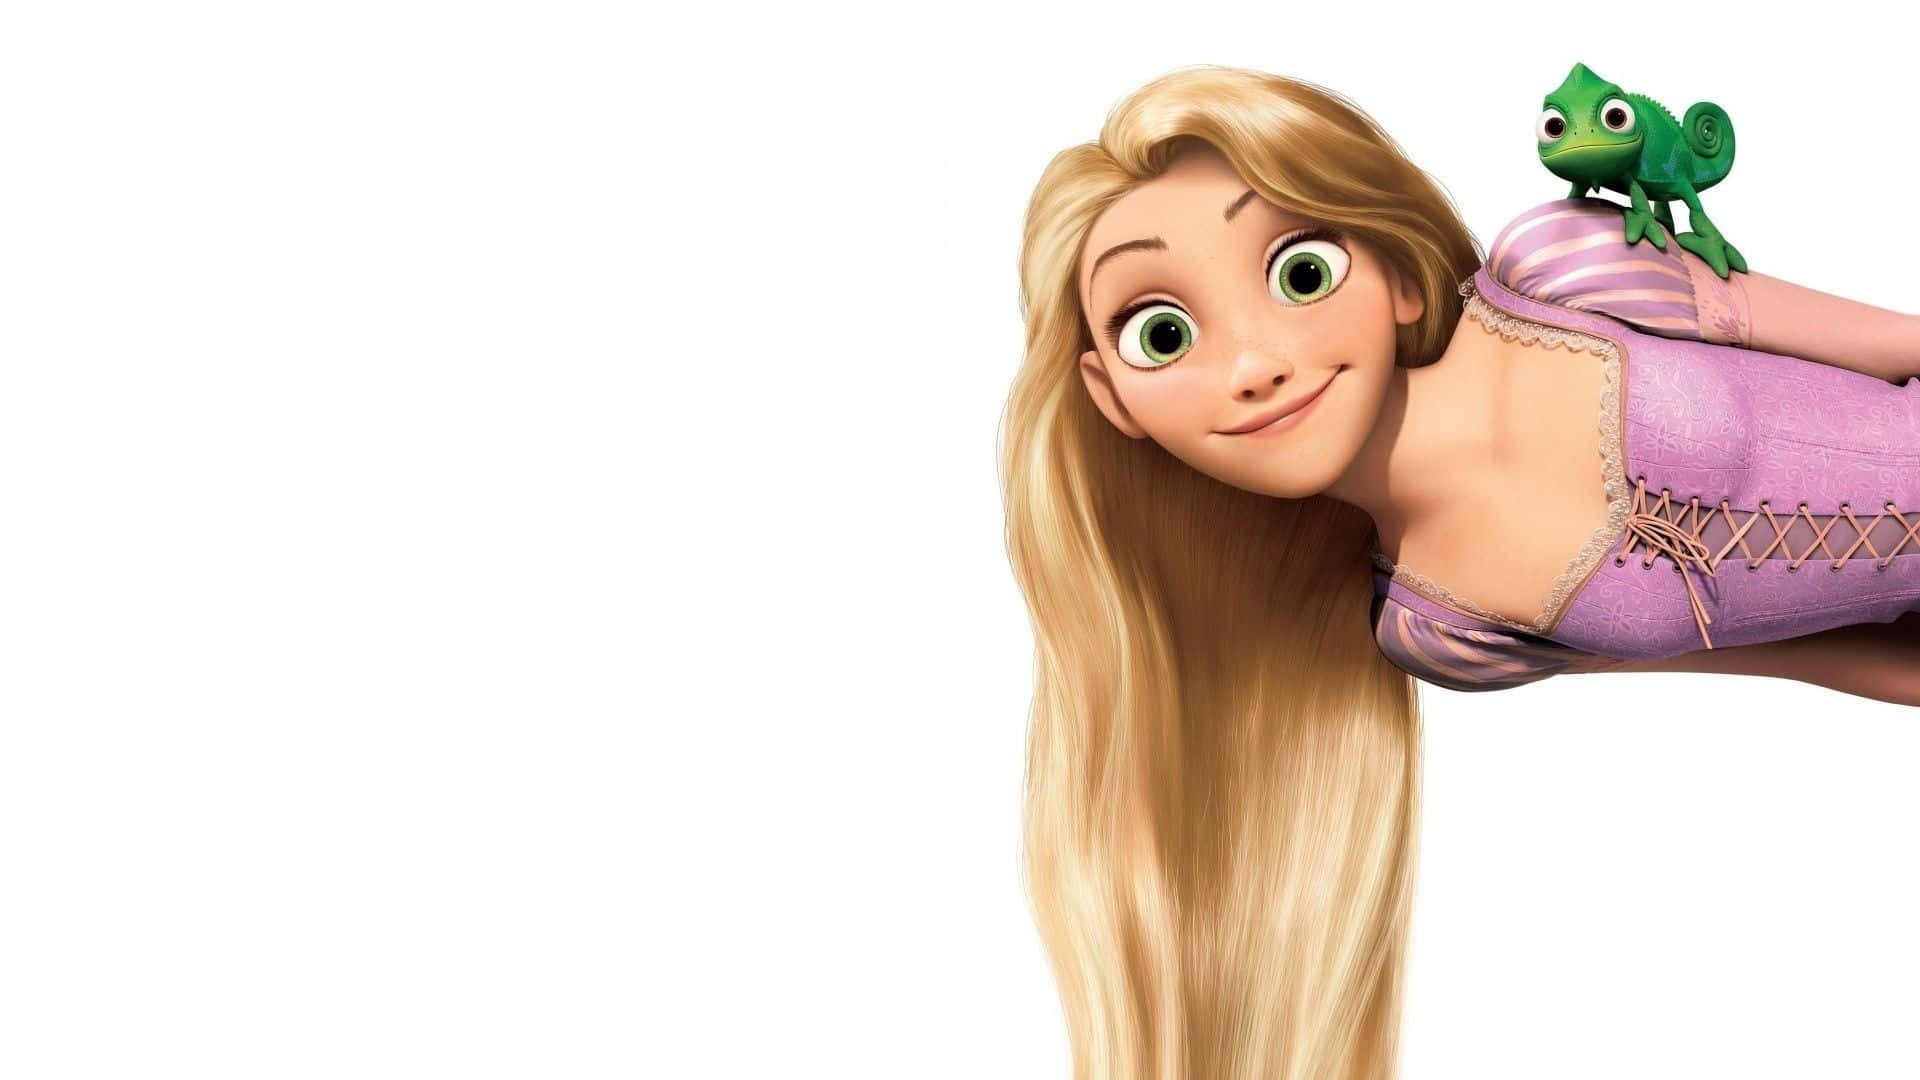 Rapunzel paints a star in the night sky in Disney's "Tangled"